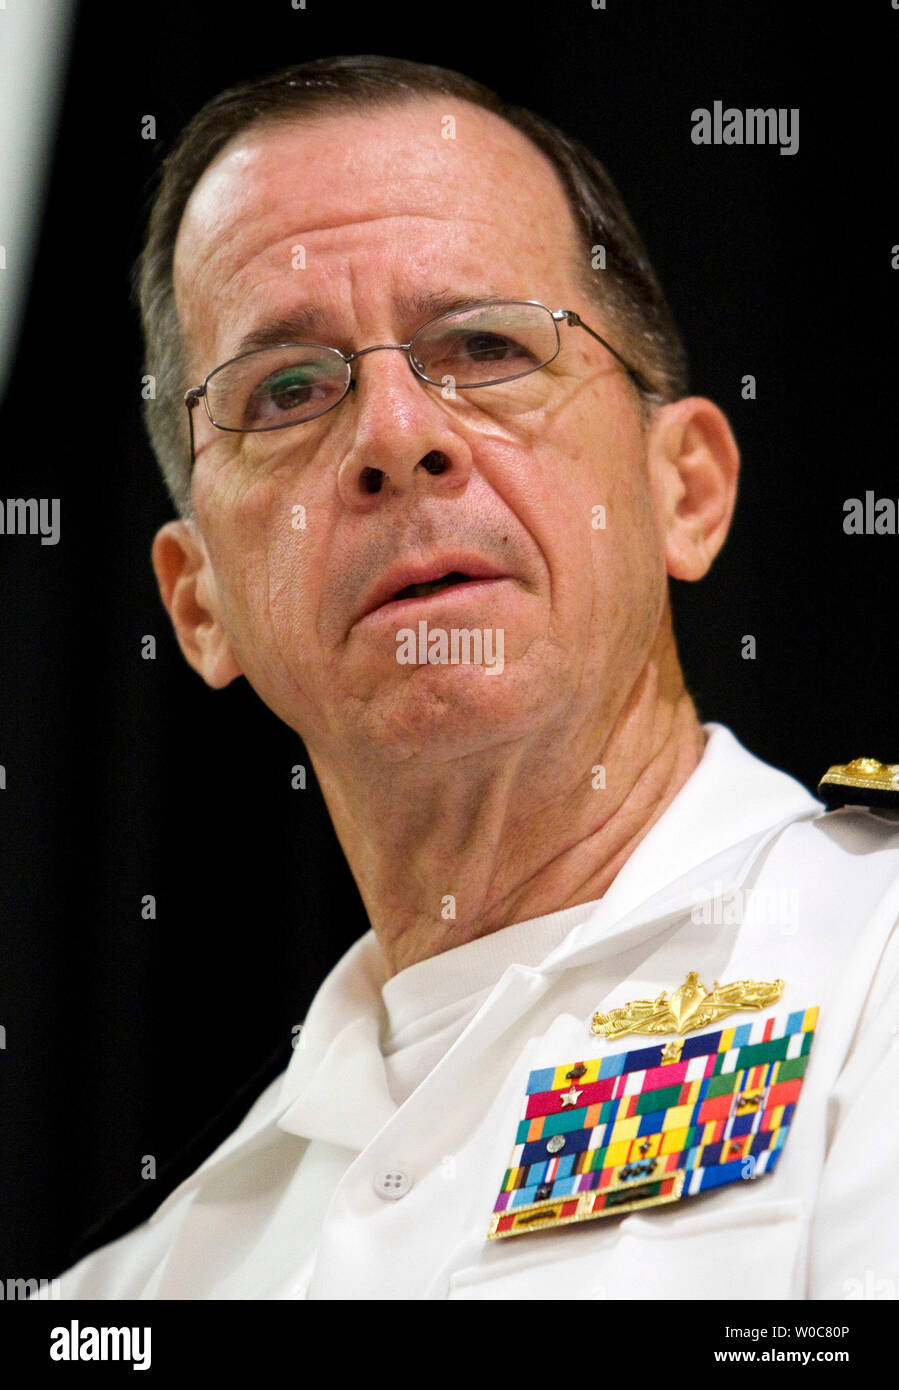 Chairman of the Joint Chiefs of Staff Admiral Michael Mullen delivers remarks at the Coalition for Homeless Veterans Conference in Washington on June 23, 2008. (UPI Photo/Patrick D. McDermott) Stock Photo